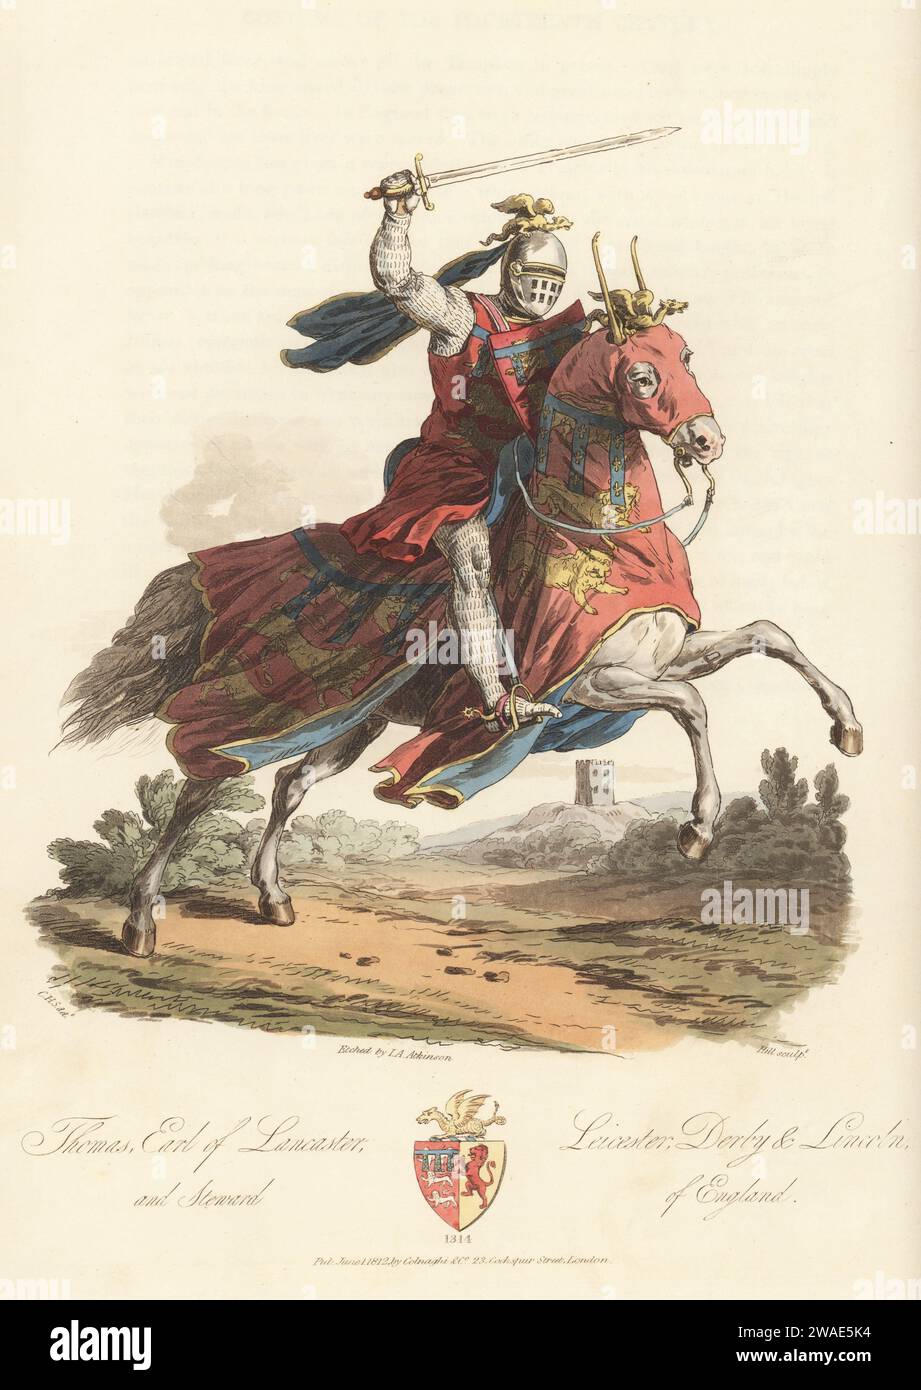 Thomas Crouchback, 2nd Earl of Lancaster, Leicester, Derby and Lincoln, Steward of England, 14th century. Charging on horseback with sword. In crested helmet, chainmail suit, emblazoned surcoat, shield and caparison. From his seal in the Cotton Library. Handcoloured copperplate engraving etched by John Augustus Atkinson, aquatinted by John Hill, after an illustration by Charles Hamilton Smith from his own Selections of Ancient Costume of Great Britain and Ireland, Colnaghi and Co., London, 1814. Stock Photo